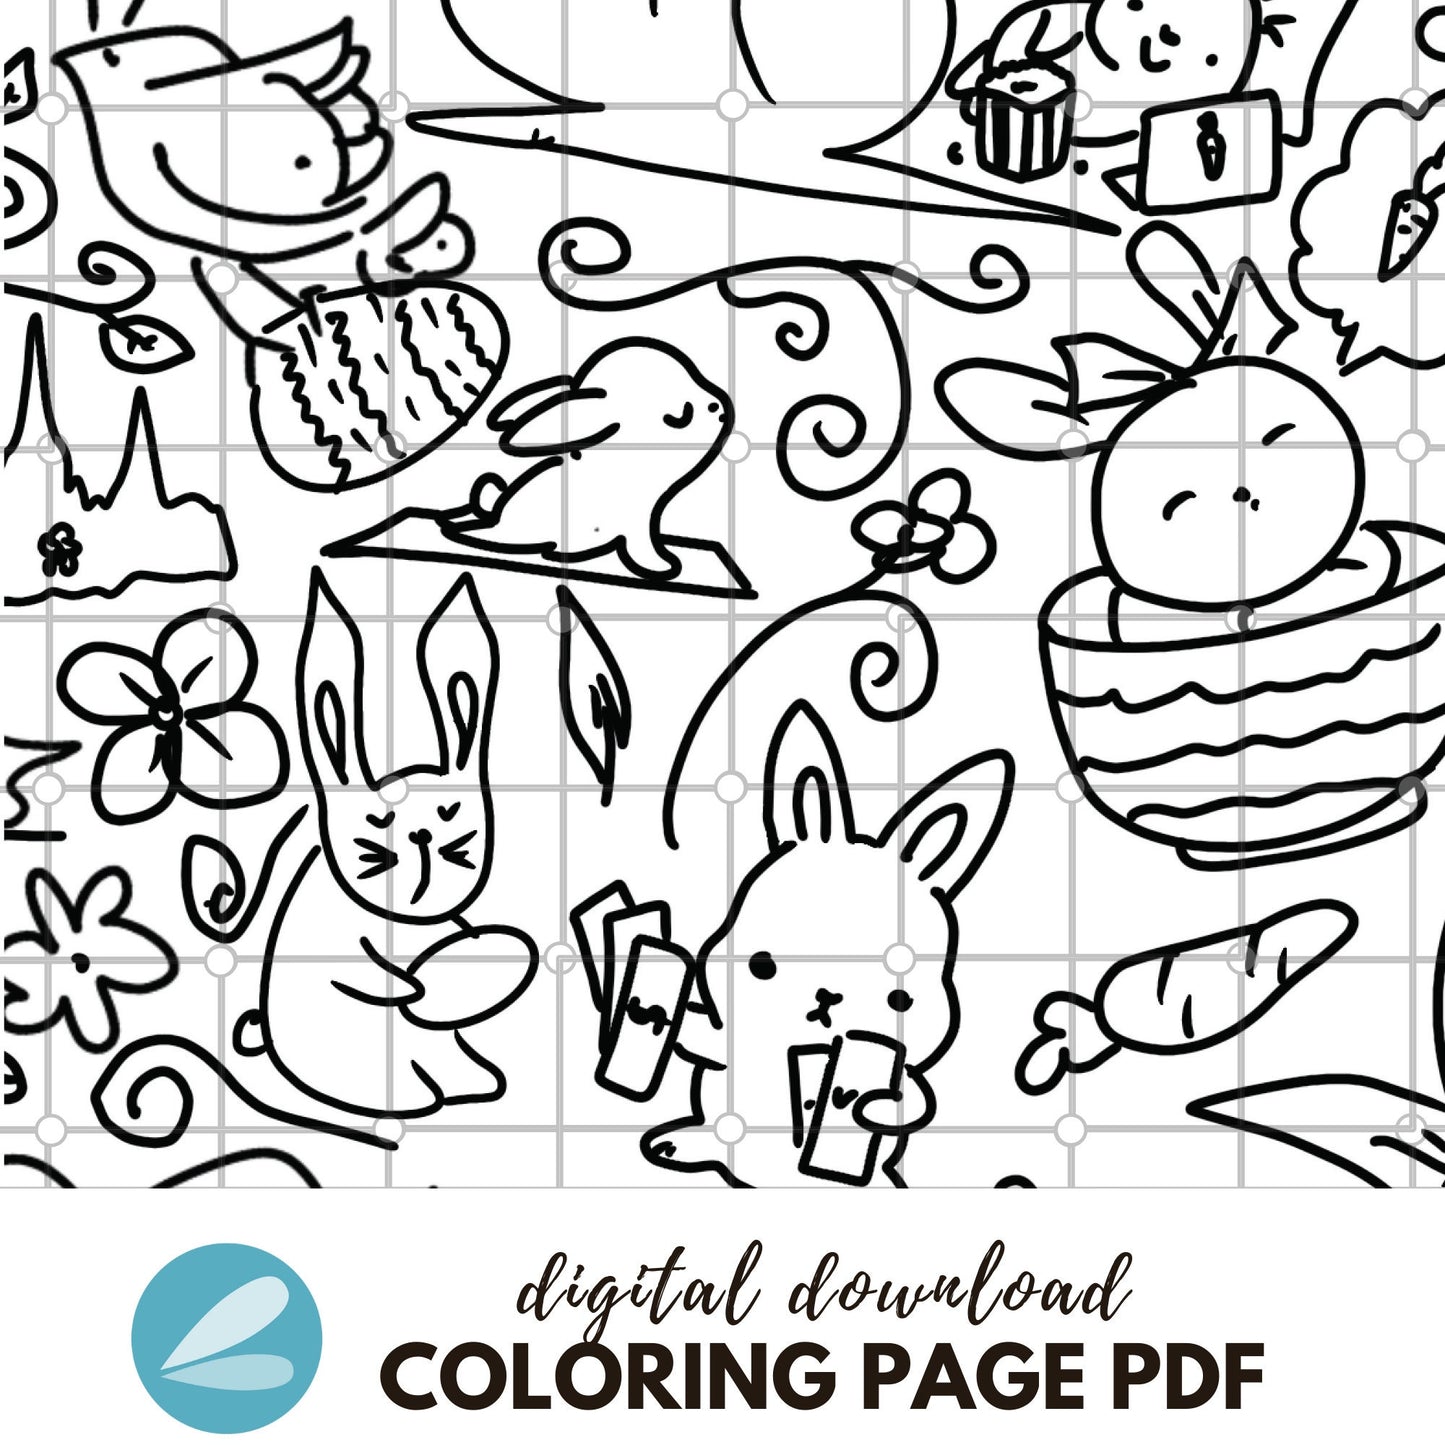 GIANT Easter Egg Coloring Page - Easter Egg Printable PDF - Instant Download